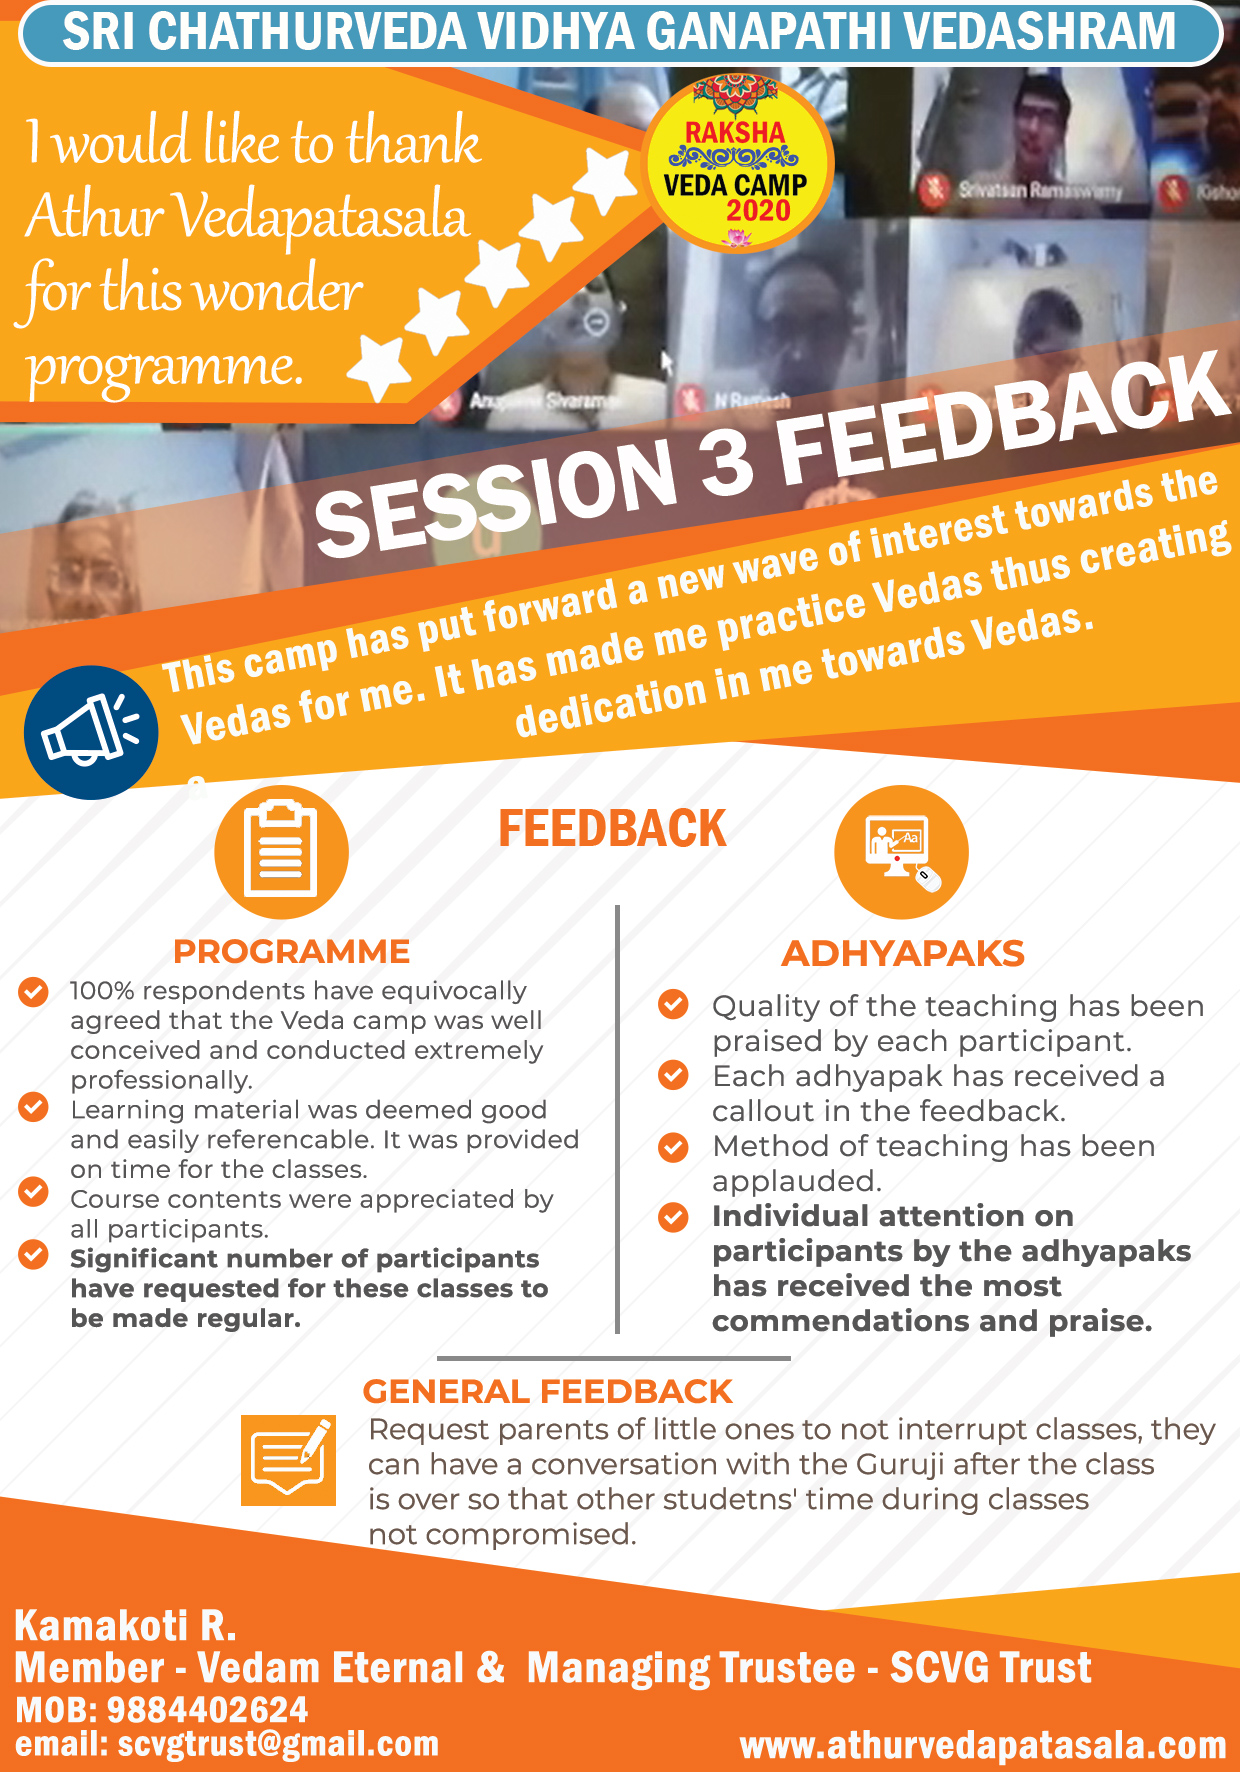 Feedback from participants of Session 3